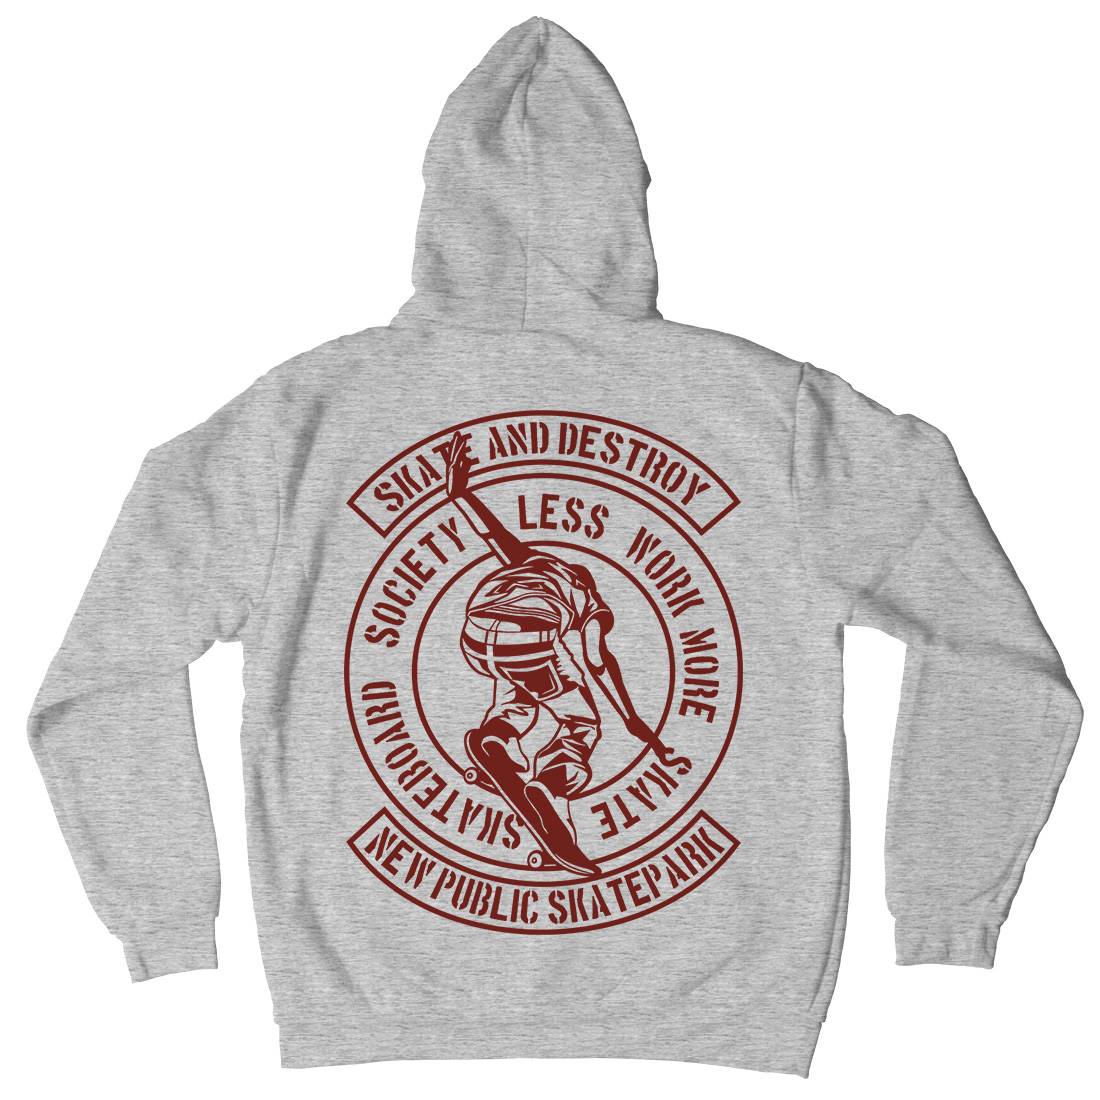 And Destroy Kids Crew Neck Hoodie Skate A142